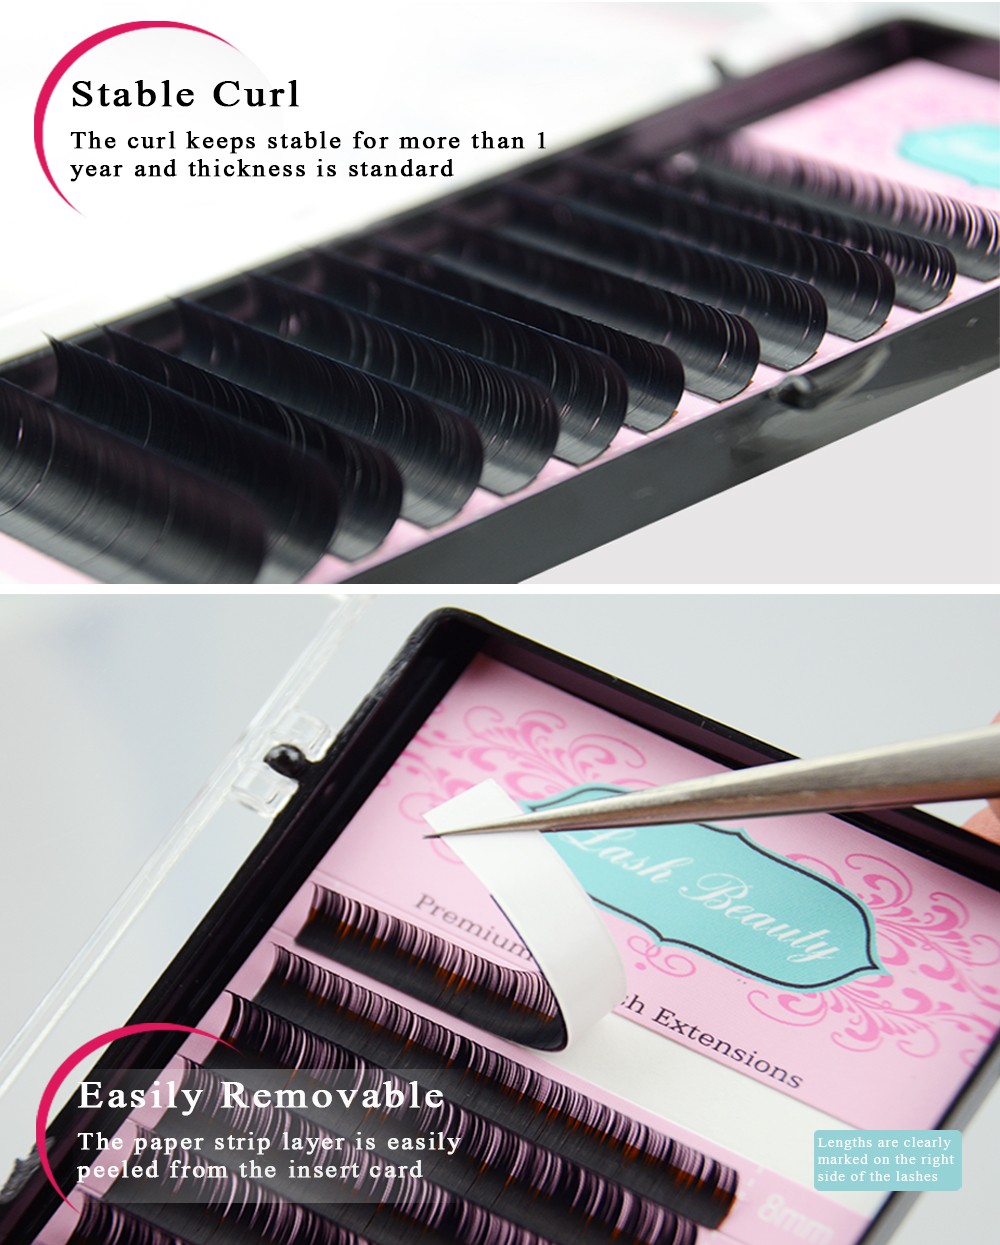 Stable Curl The curl keeps stable for more than 1 year and thickness is standard Easily Removable The paper strip layer is easily peeled from the insert card Lengths are clearly marked on the right side of the lashes